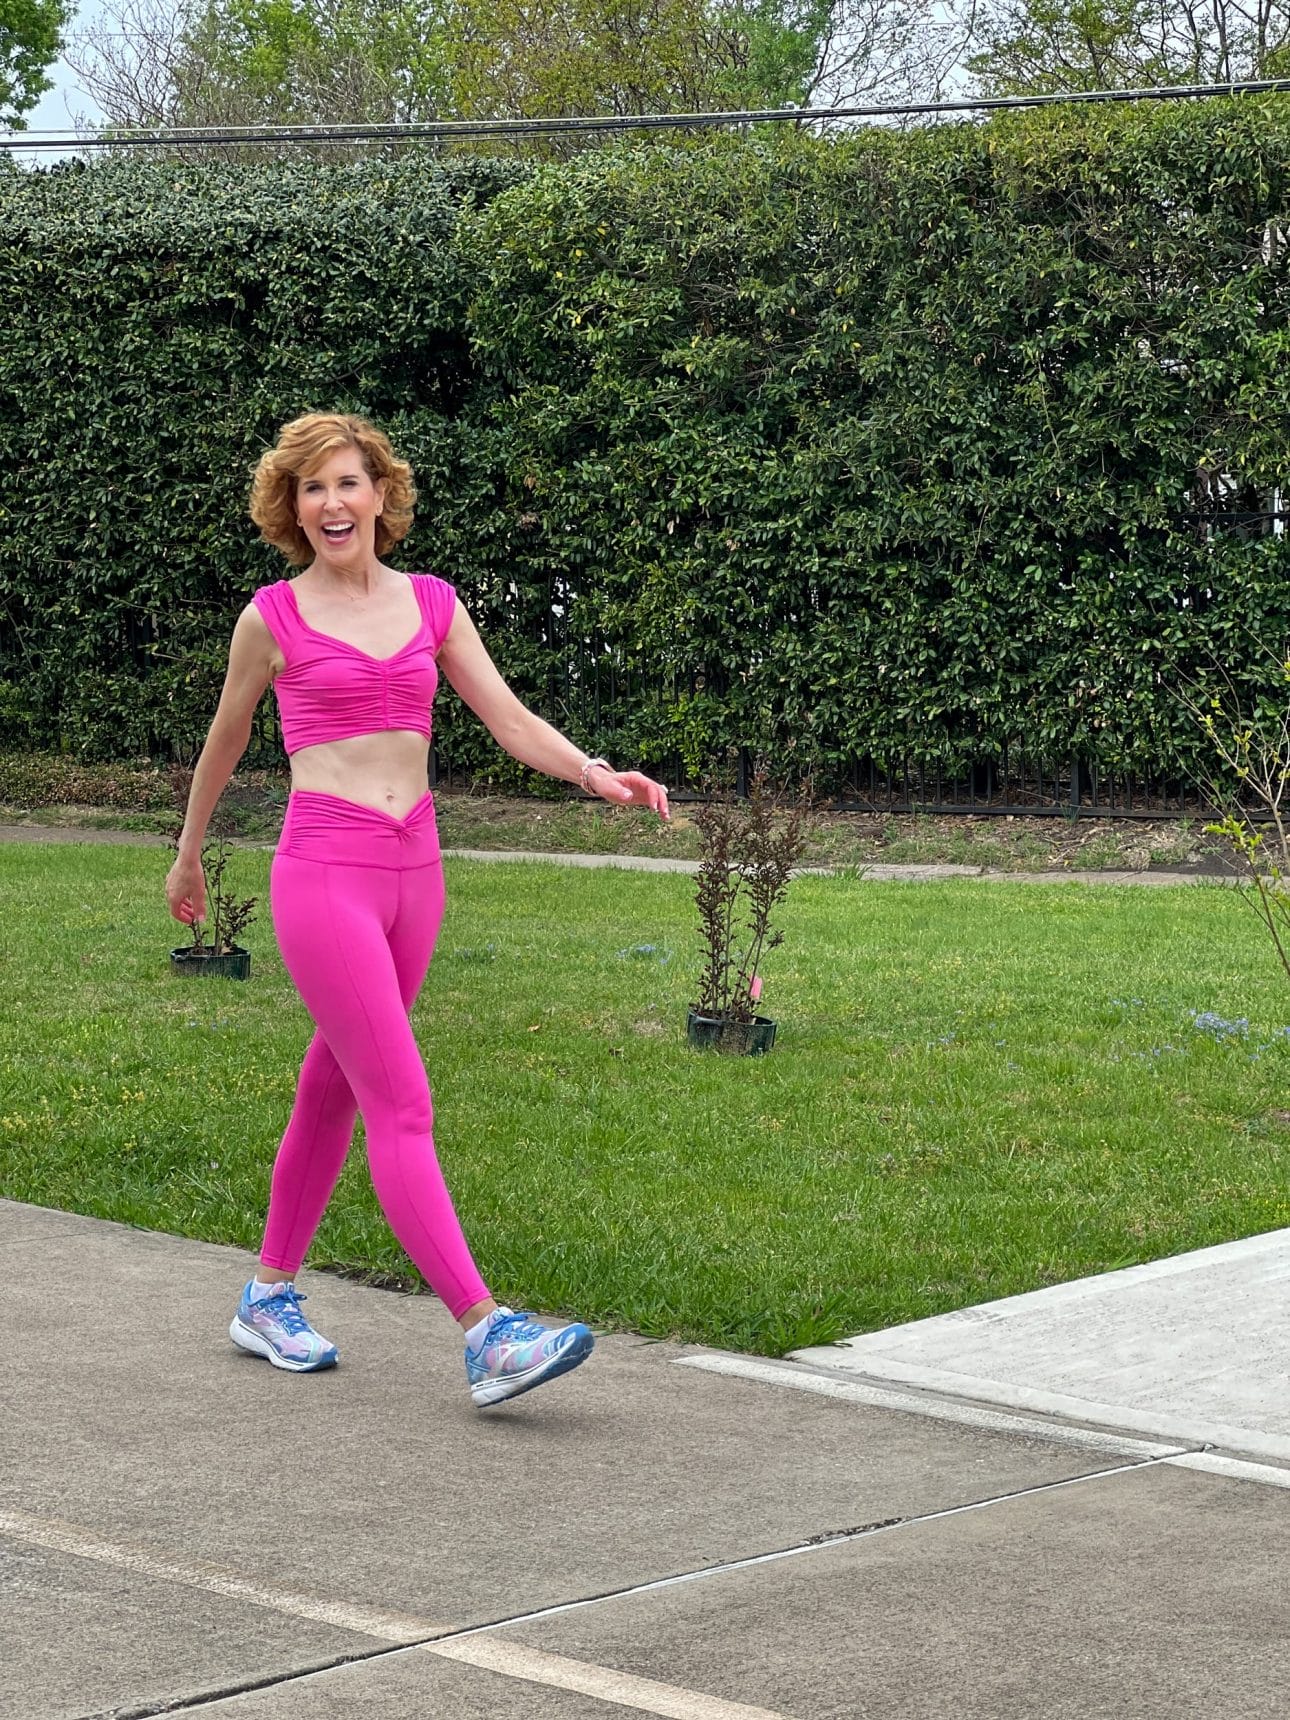 Walking For Health, Fitness & Weight Loss When You're Over 50